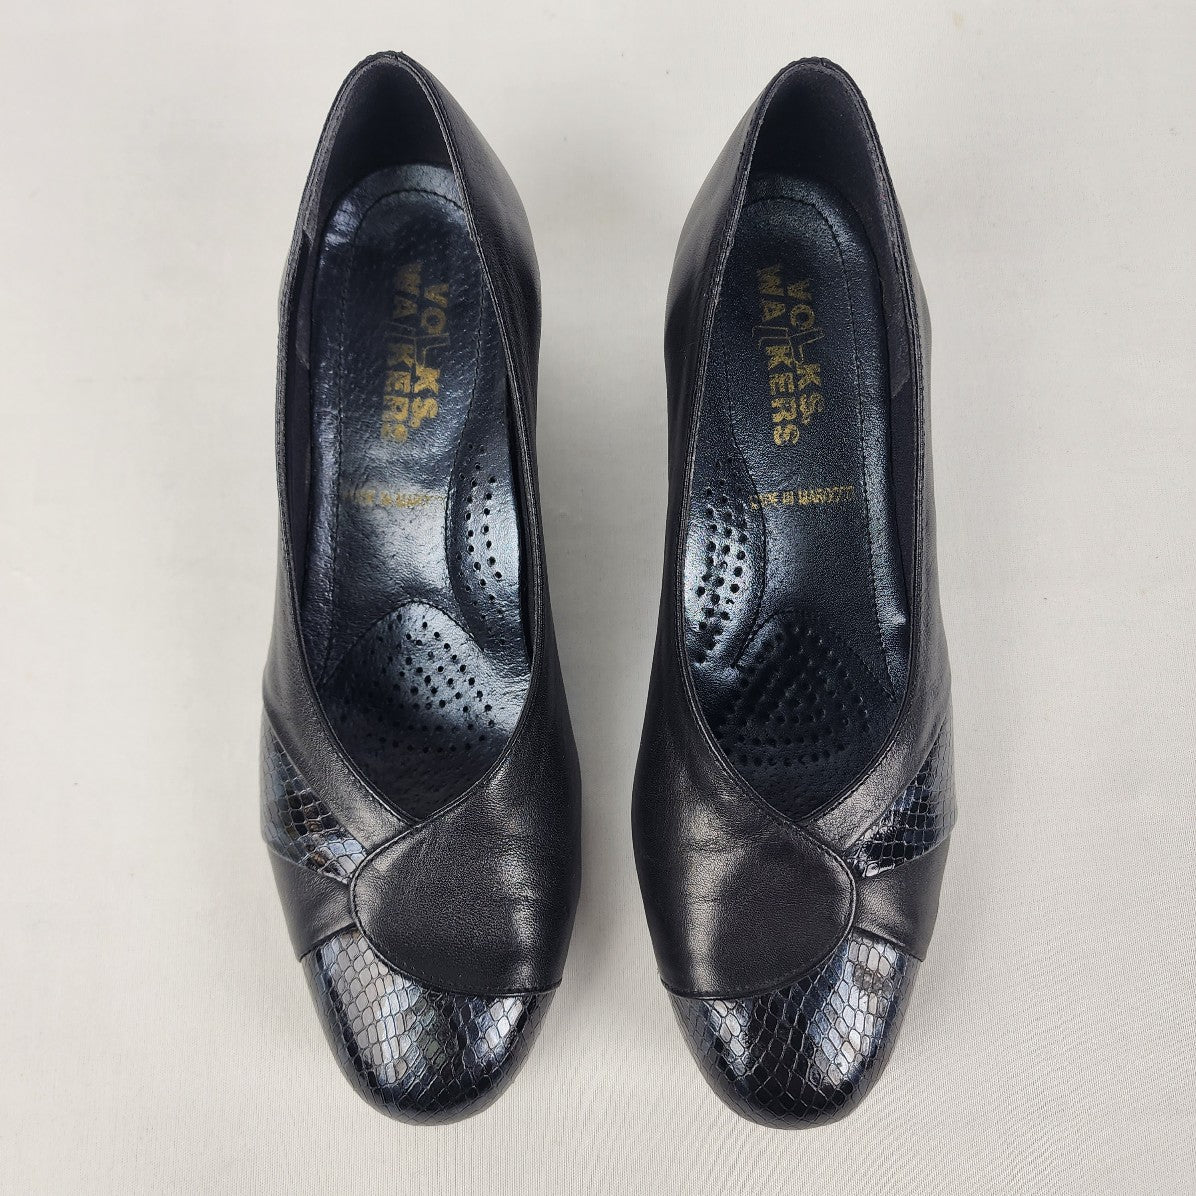 Volks Walkers Black Animal Print Leather Shoes Size 9